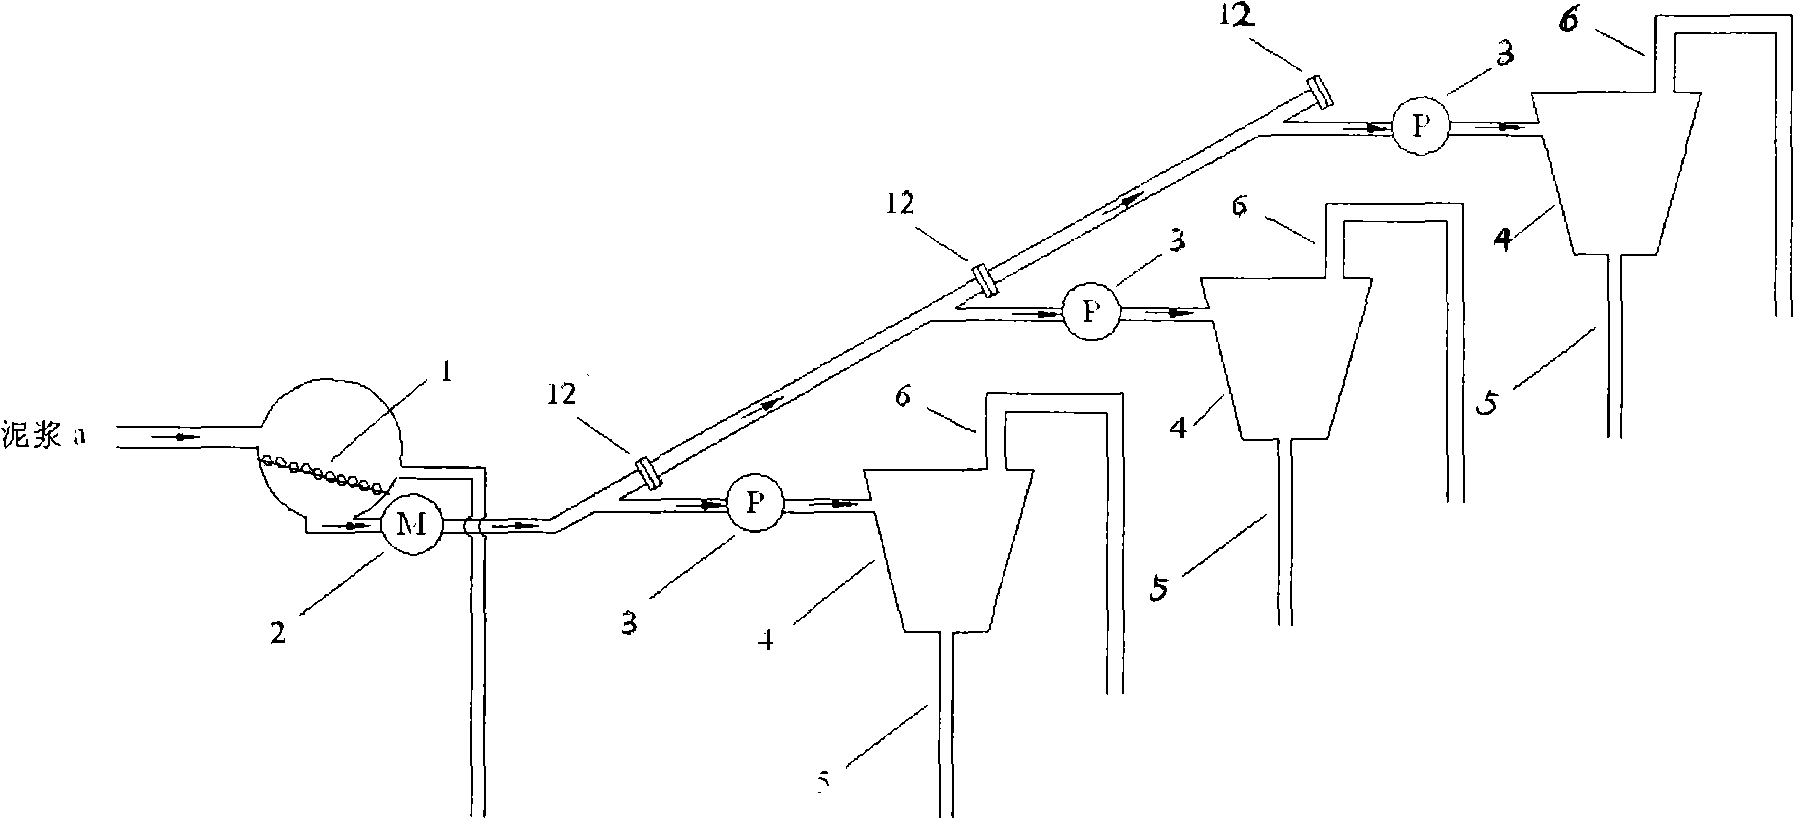 Construction process for blowing-filling sludge and reclaiming land from sea and device thereof